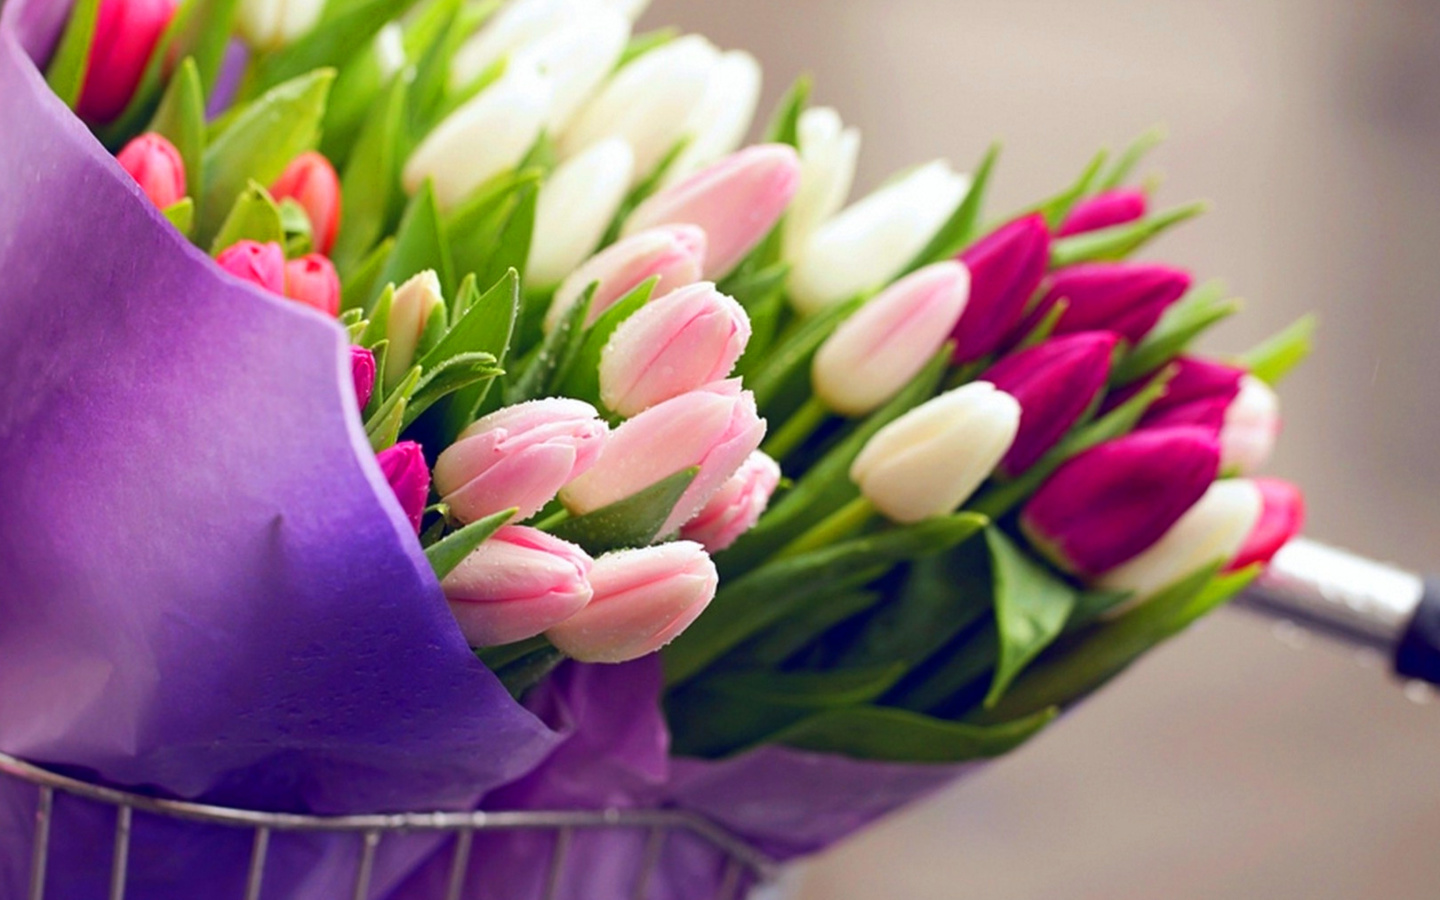 Tulips for You wallpaper 1440x900